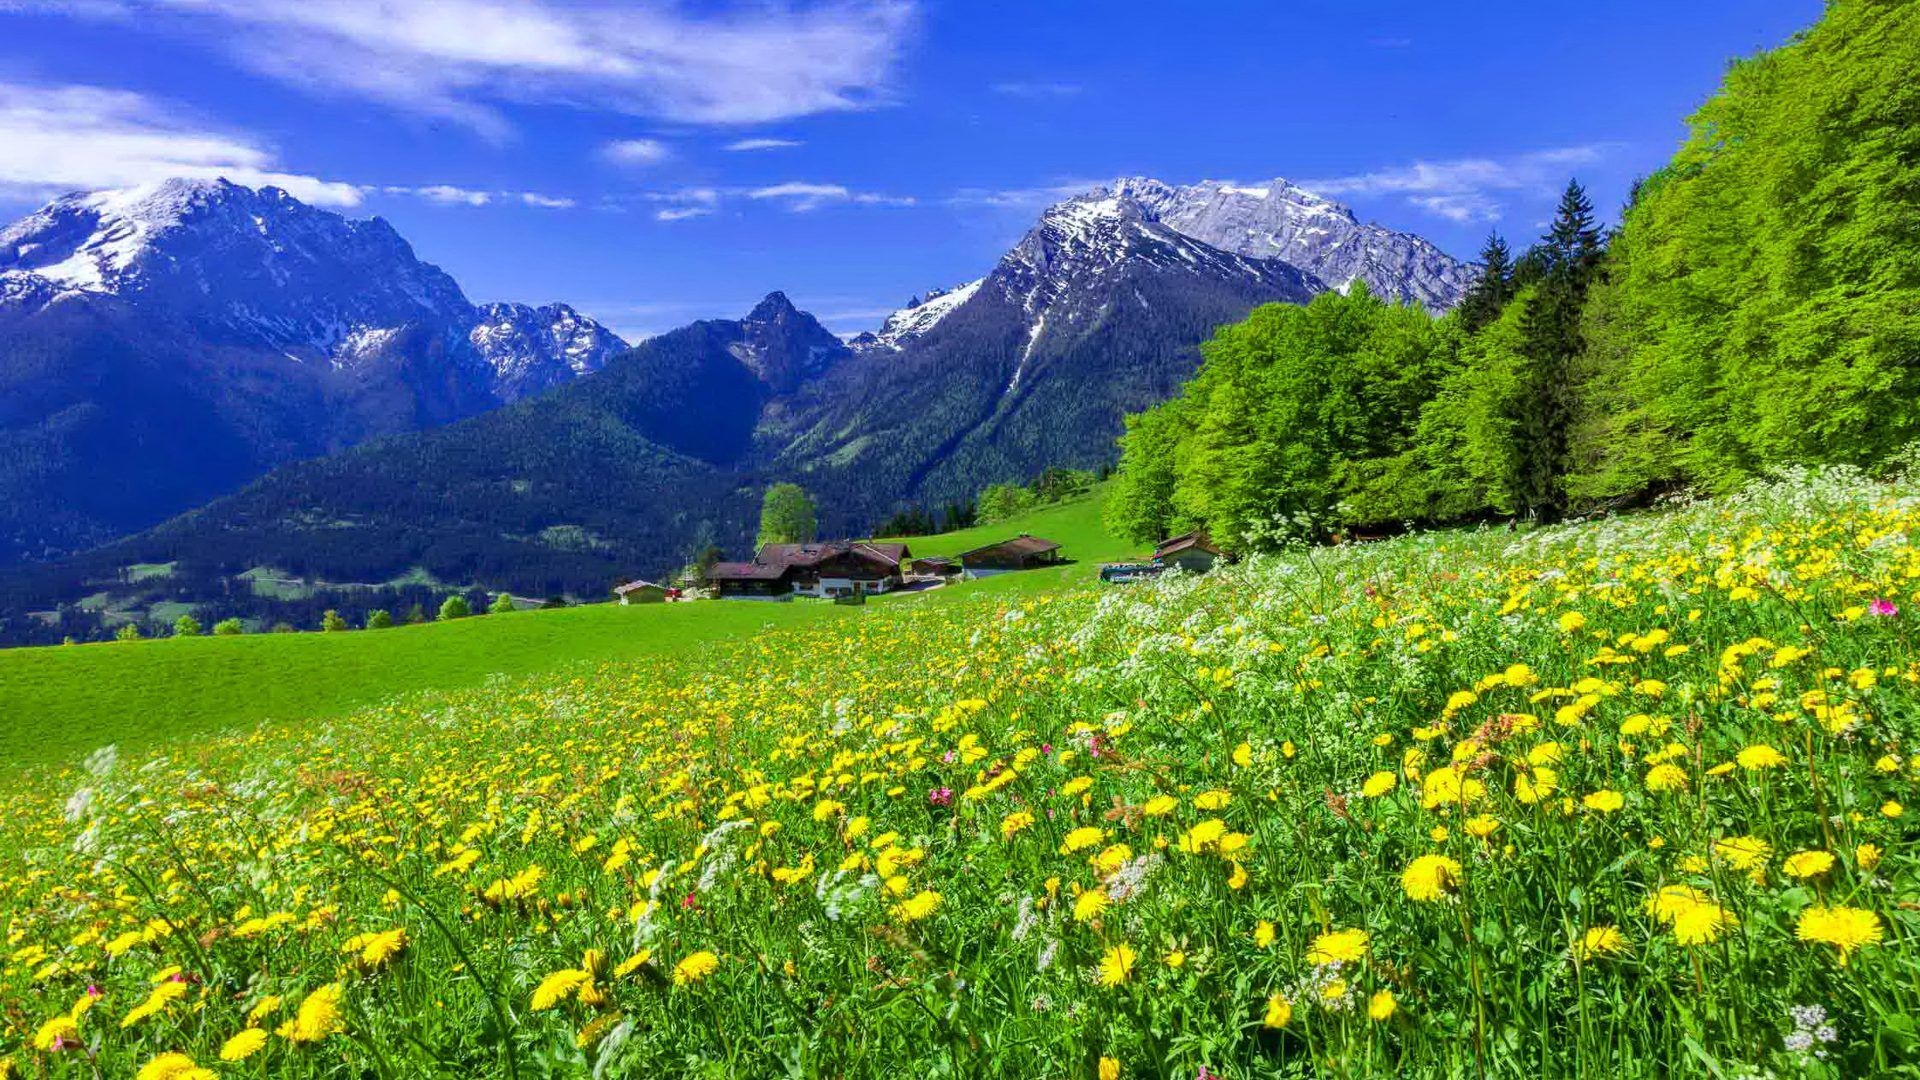 Mountain Meadow Landscape With Beautiful Mountain Flowers Yellow And White Flowers And Green Grass With Mountains Pine Forest Snowy Mountain Peaks Blue Desktop Wallpaper Background Free Download, Wallpaper13.com